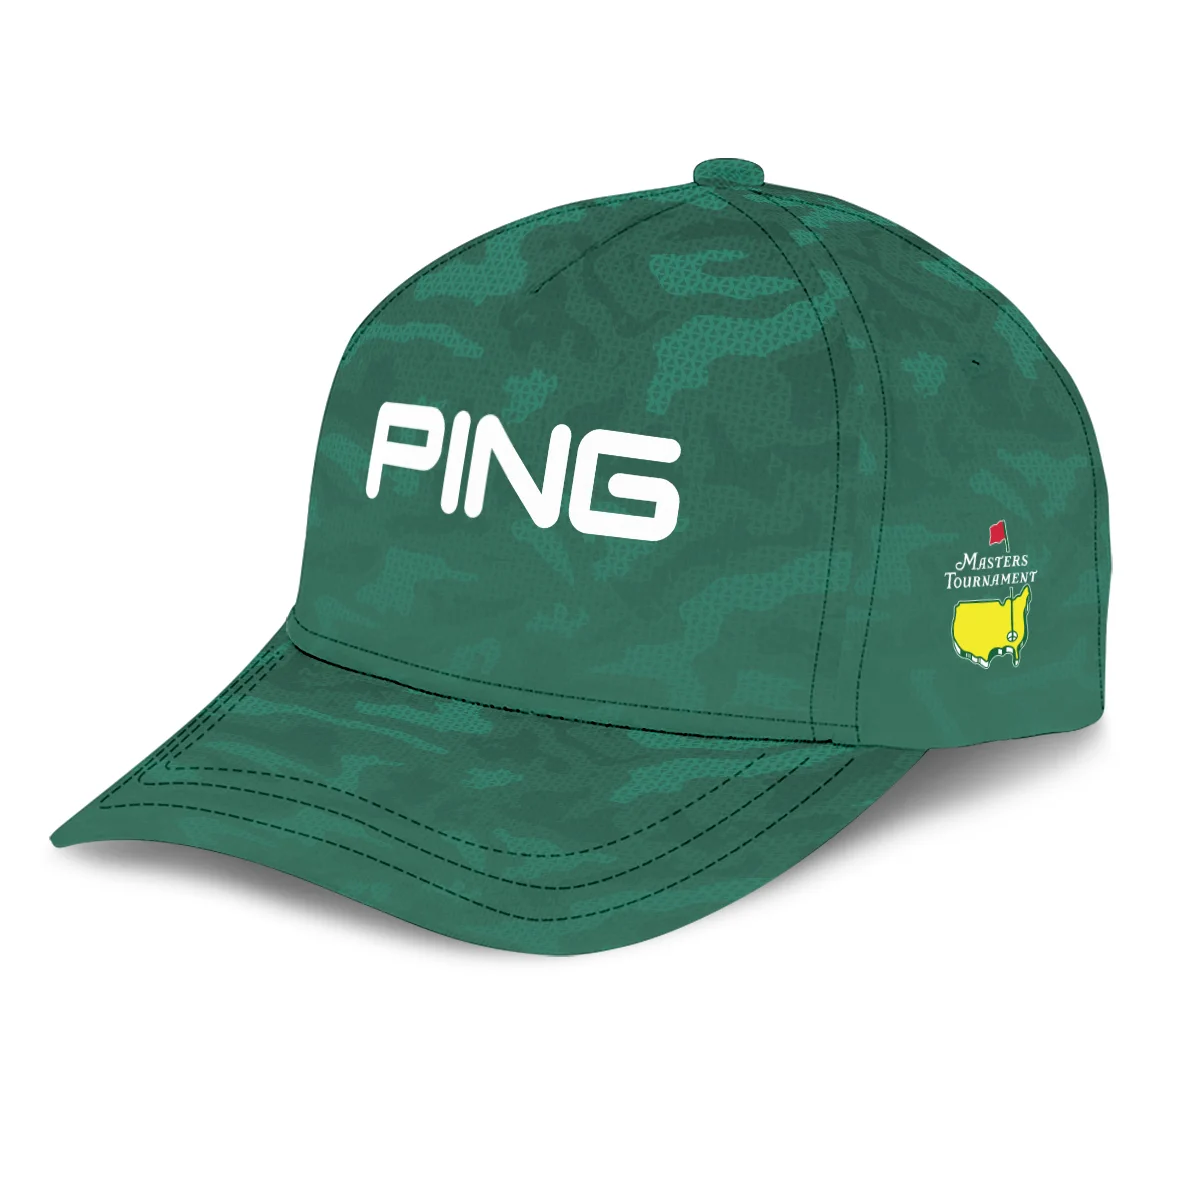 Golf Pattern White Green Callaway Masters Tournament Style Classic Golf All over Print Cap